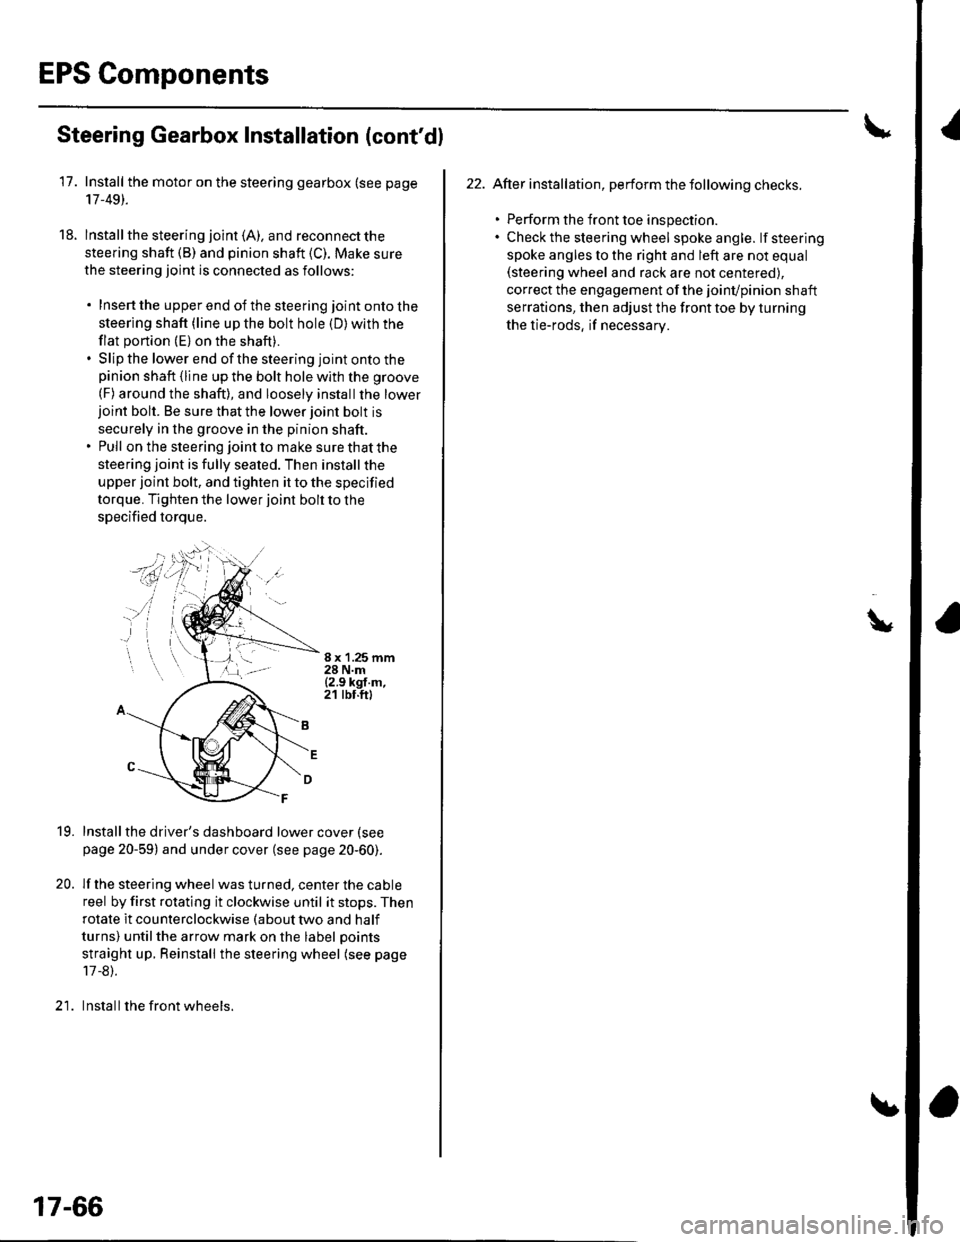 HONDA CIVIC 2002 7.G Workshop Manual EPS Components
4
17.
18.
Steering Gearbox Installation (contdl
Install the motor on the steering gearbox (see page
17-49).
lnstall the steering joint (A). and reconnect the
steering shaft (B) and pin